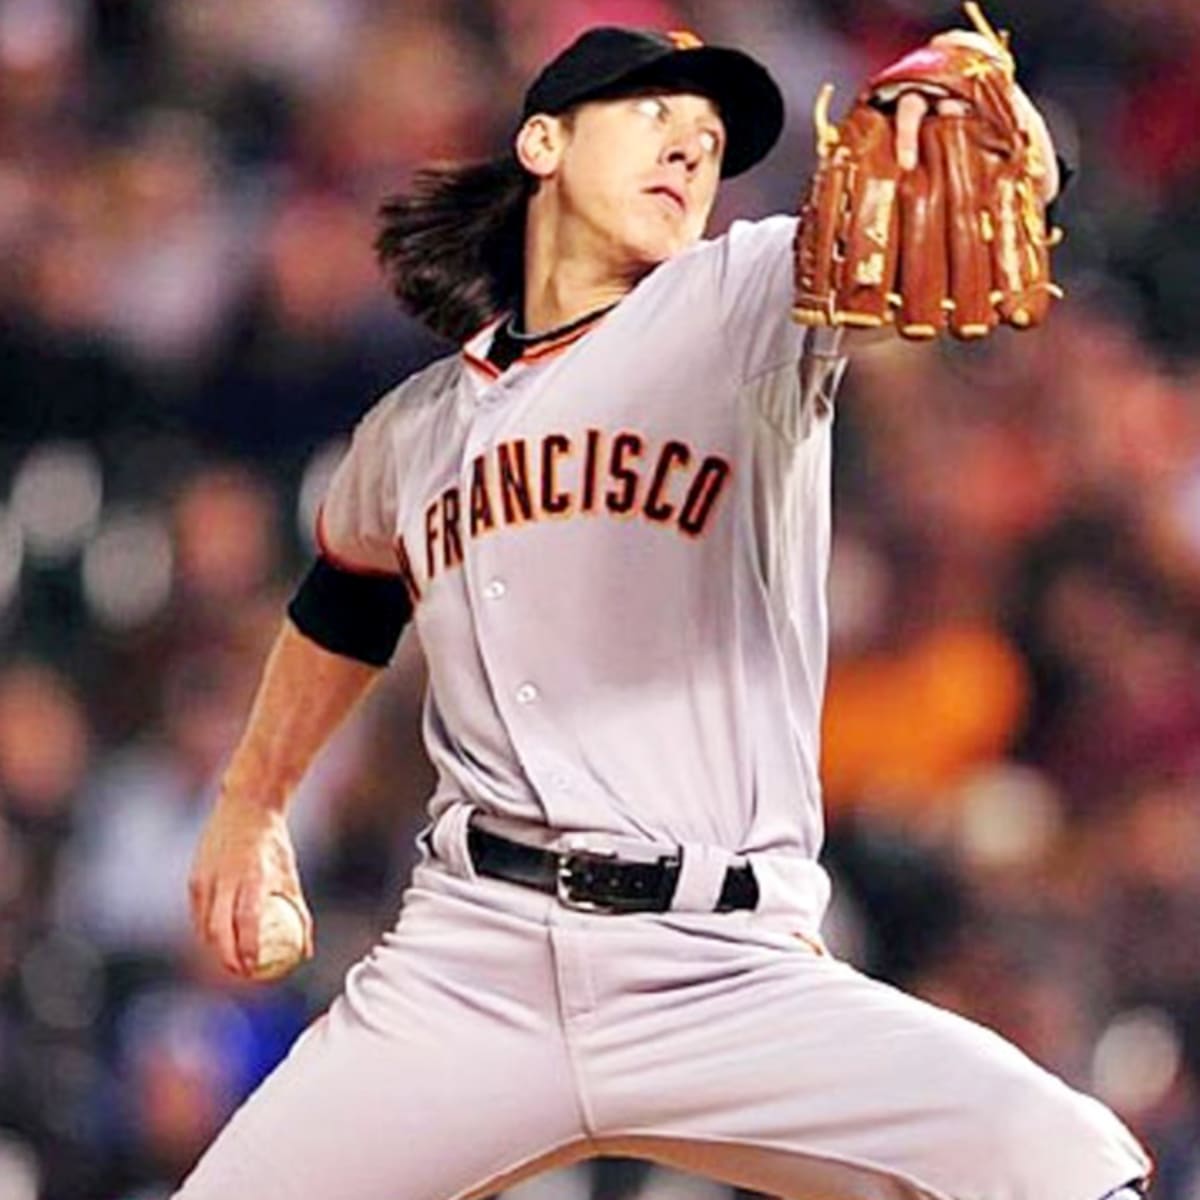 Tim Lincecum once expressed his admiration for his older brother